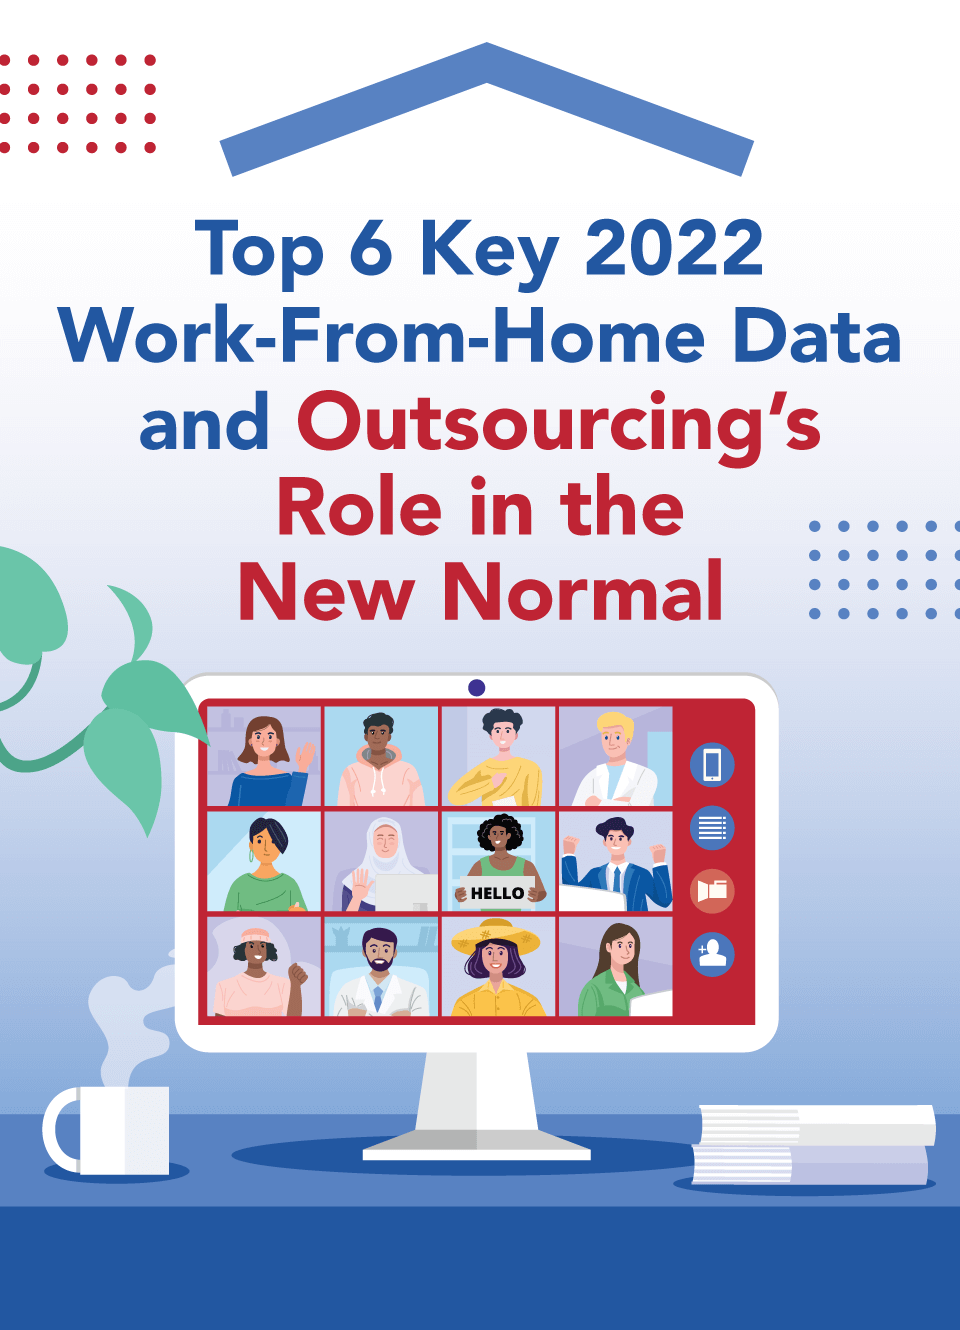 Top 6 Key 2022 Work From Home Trends and Outsourcing part 1